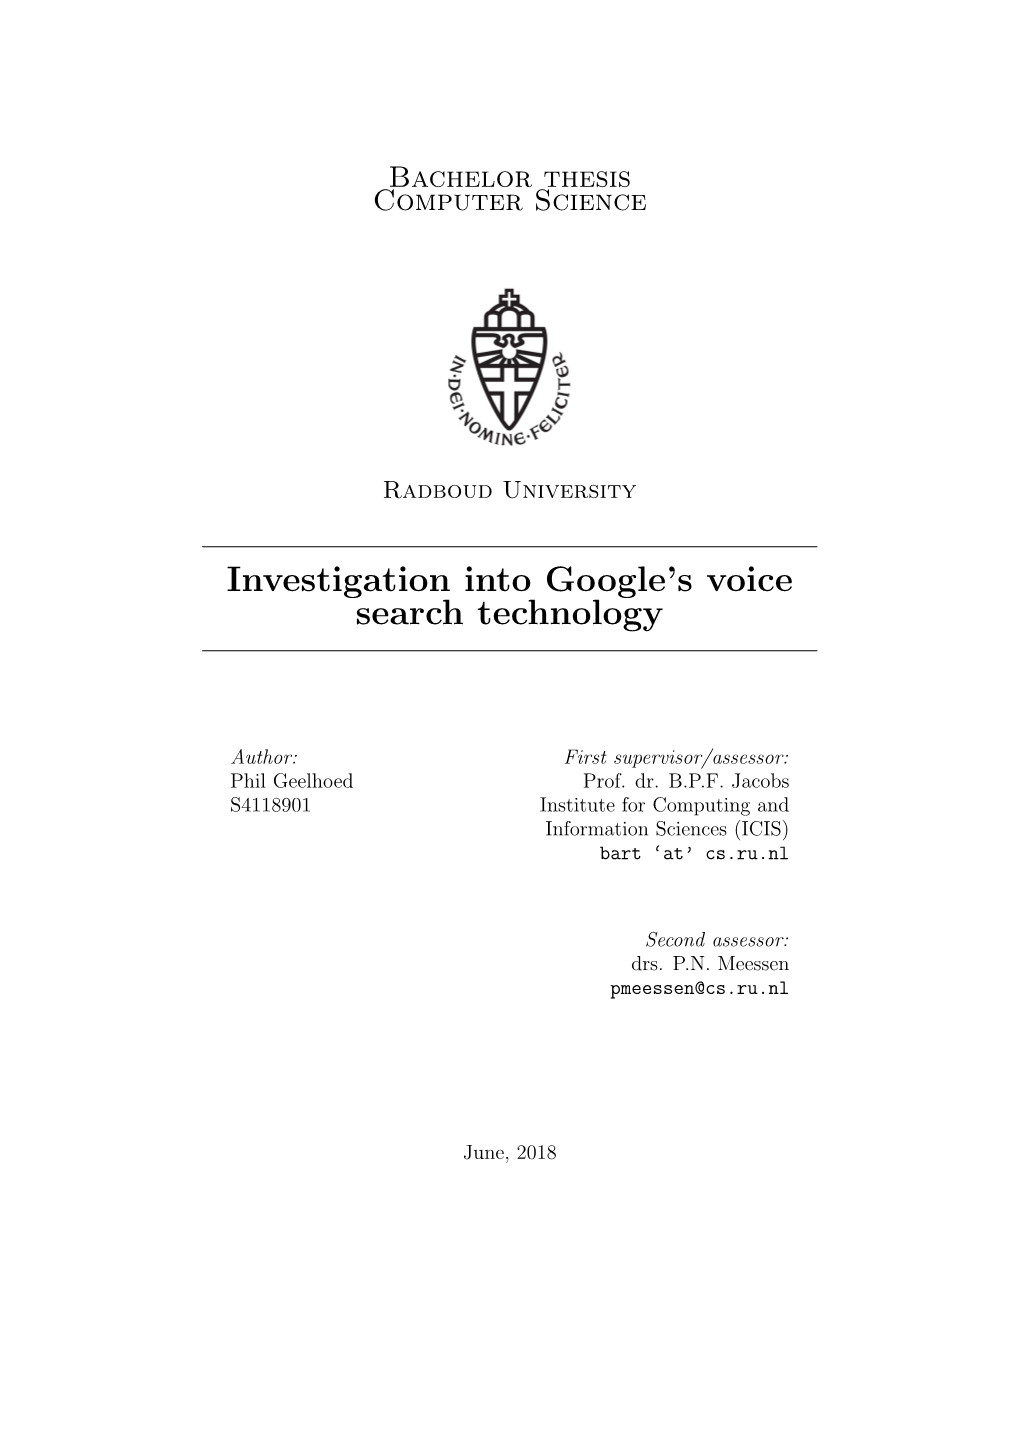 Investigation Into Google's Voice Search Technology